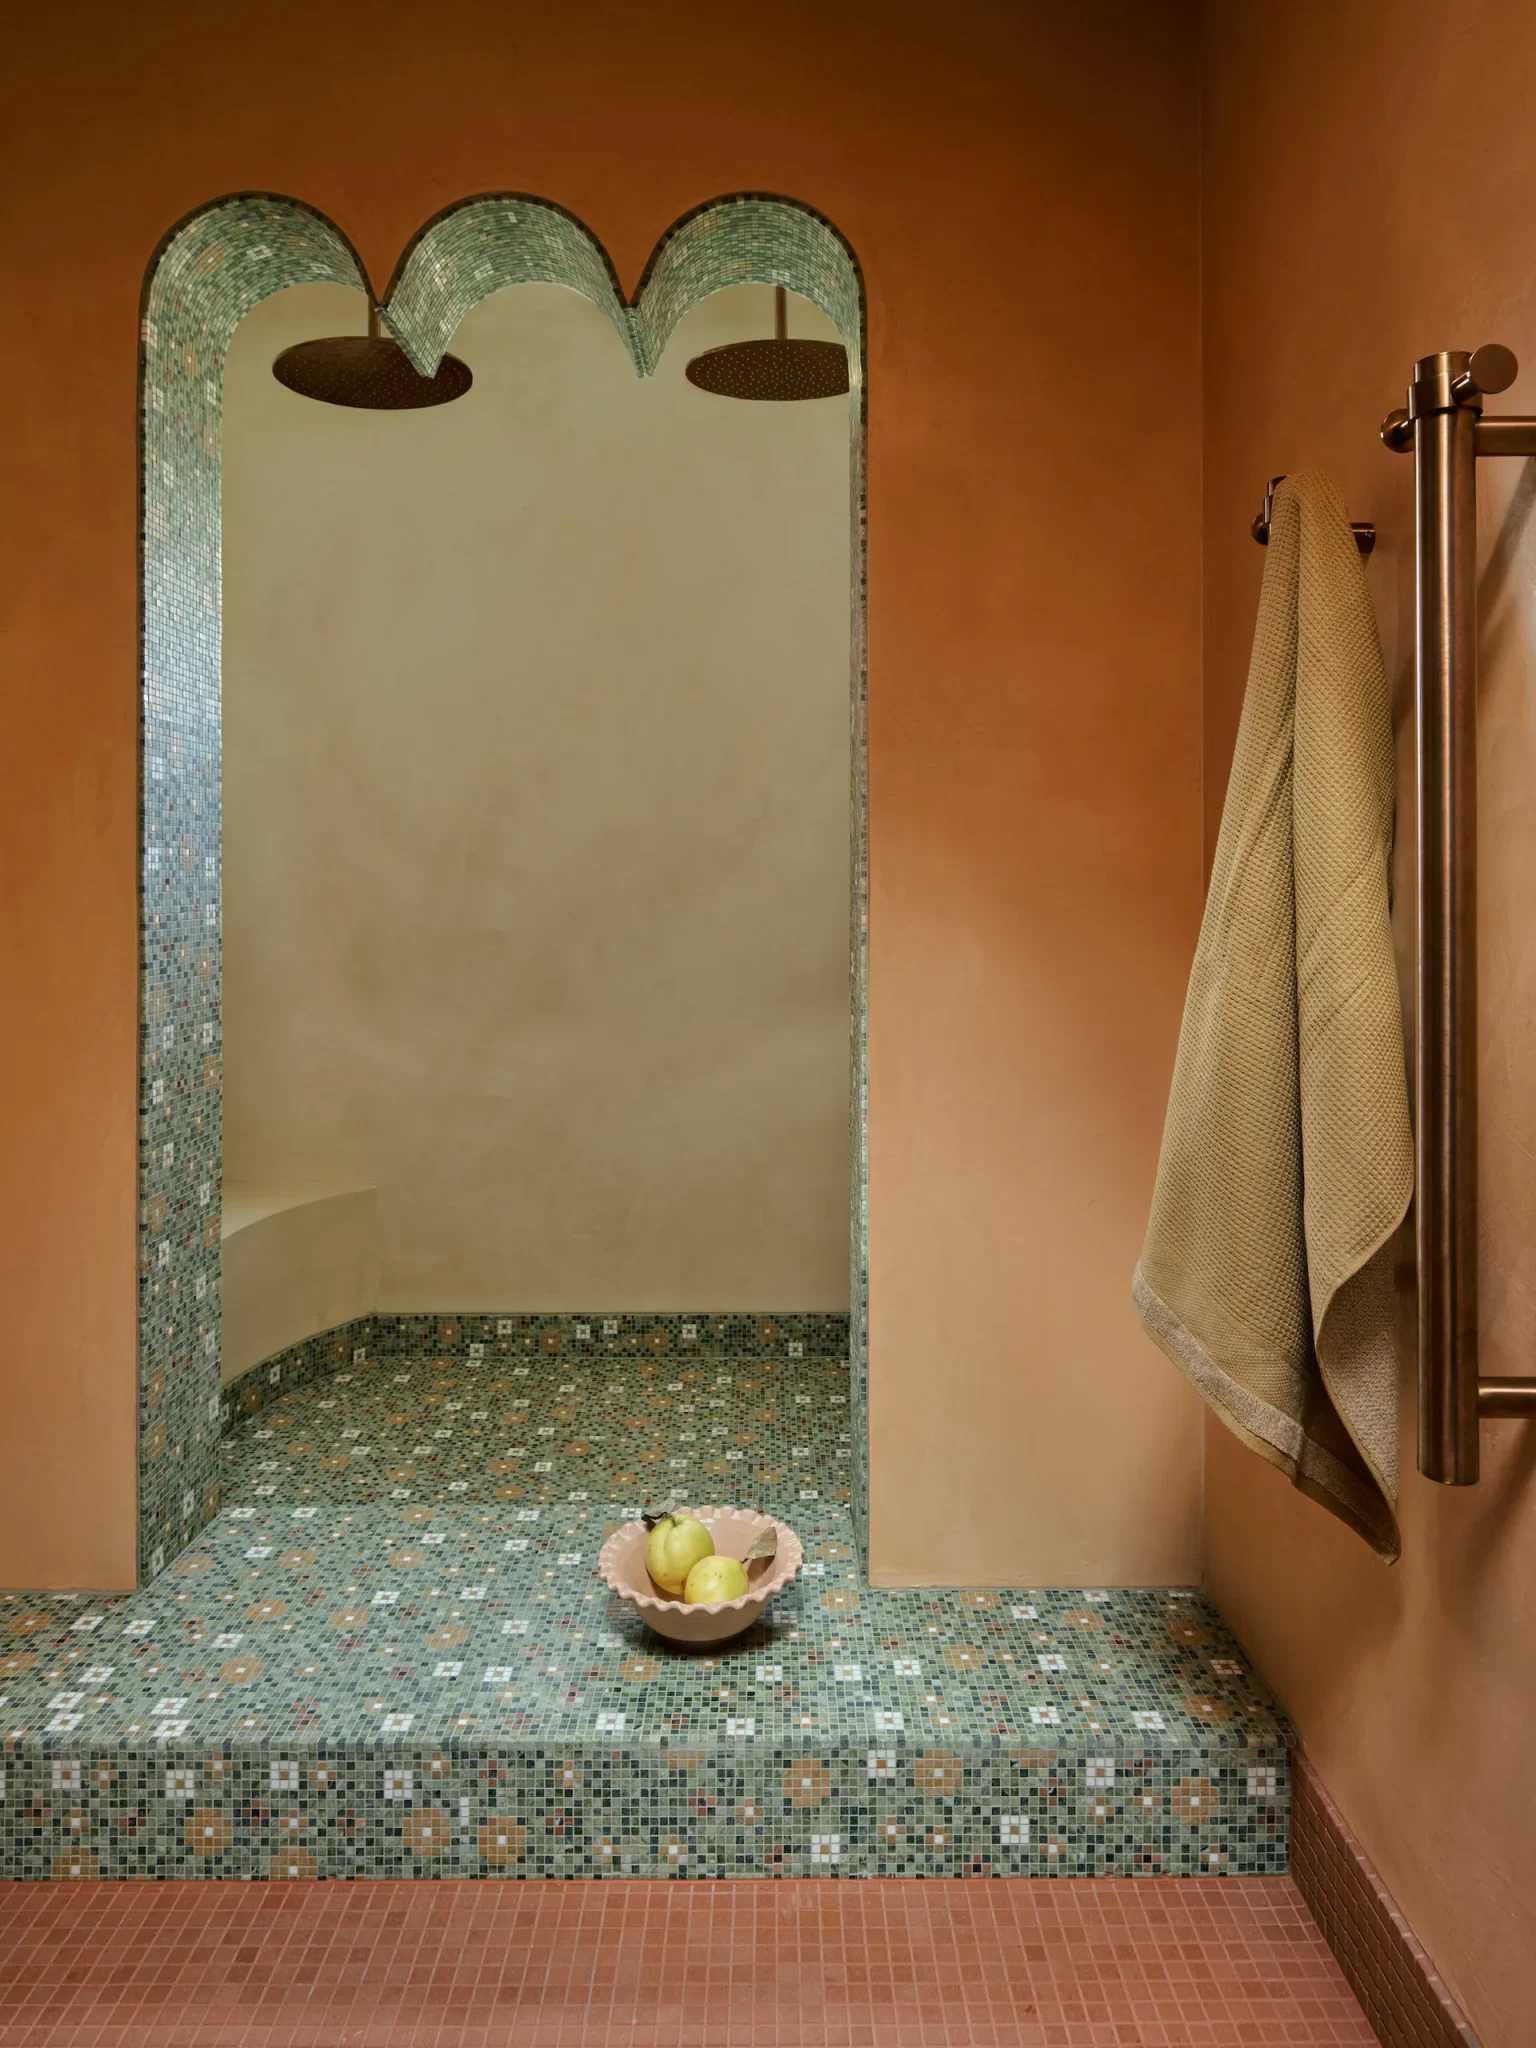 Bathroom addorned with green floring and terracota walls